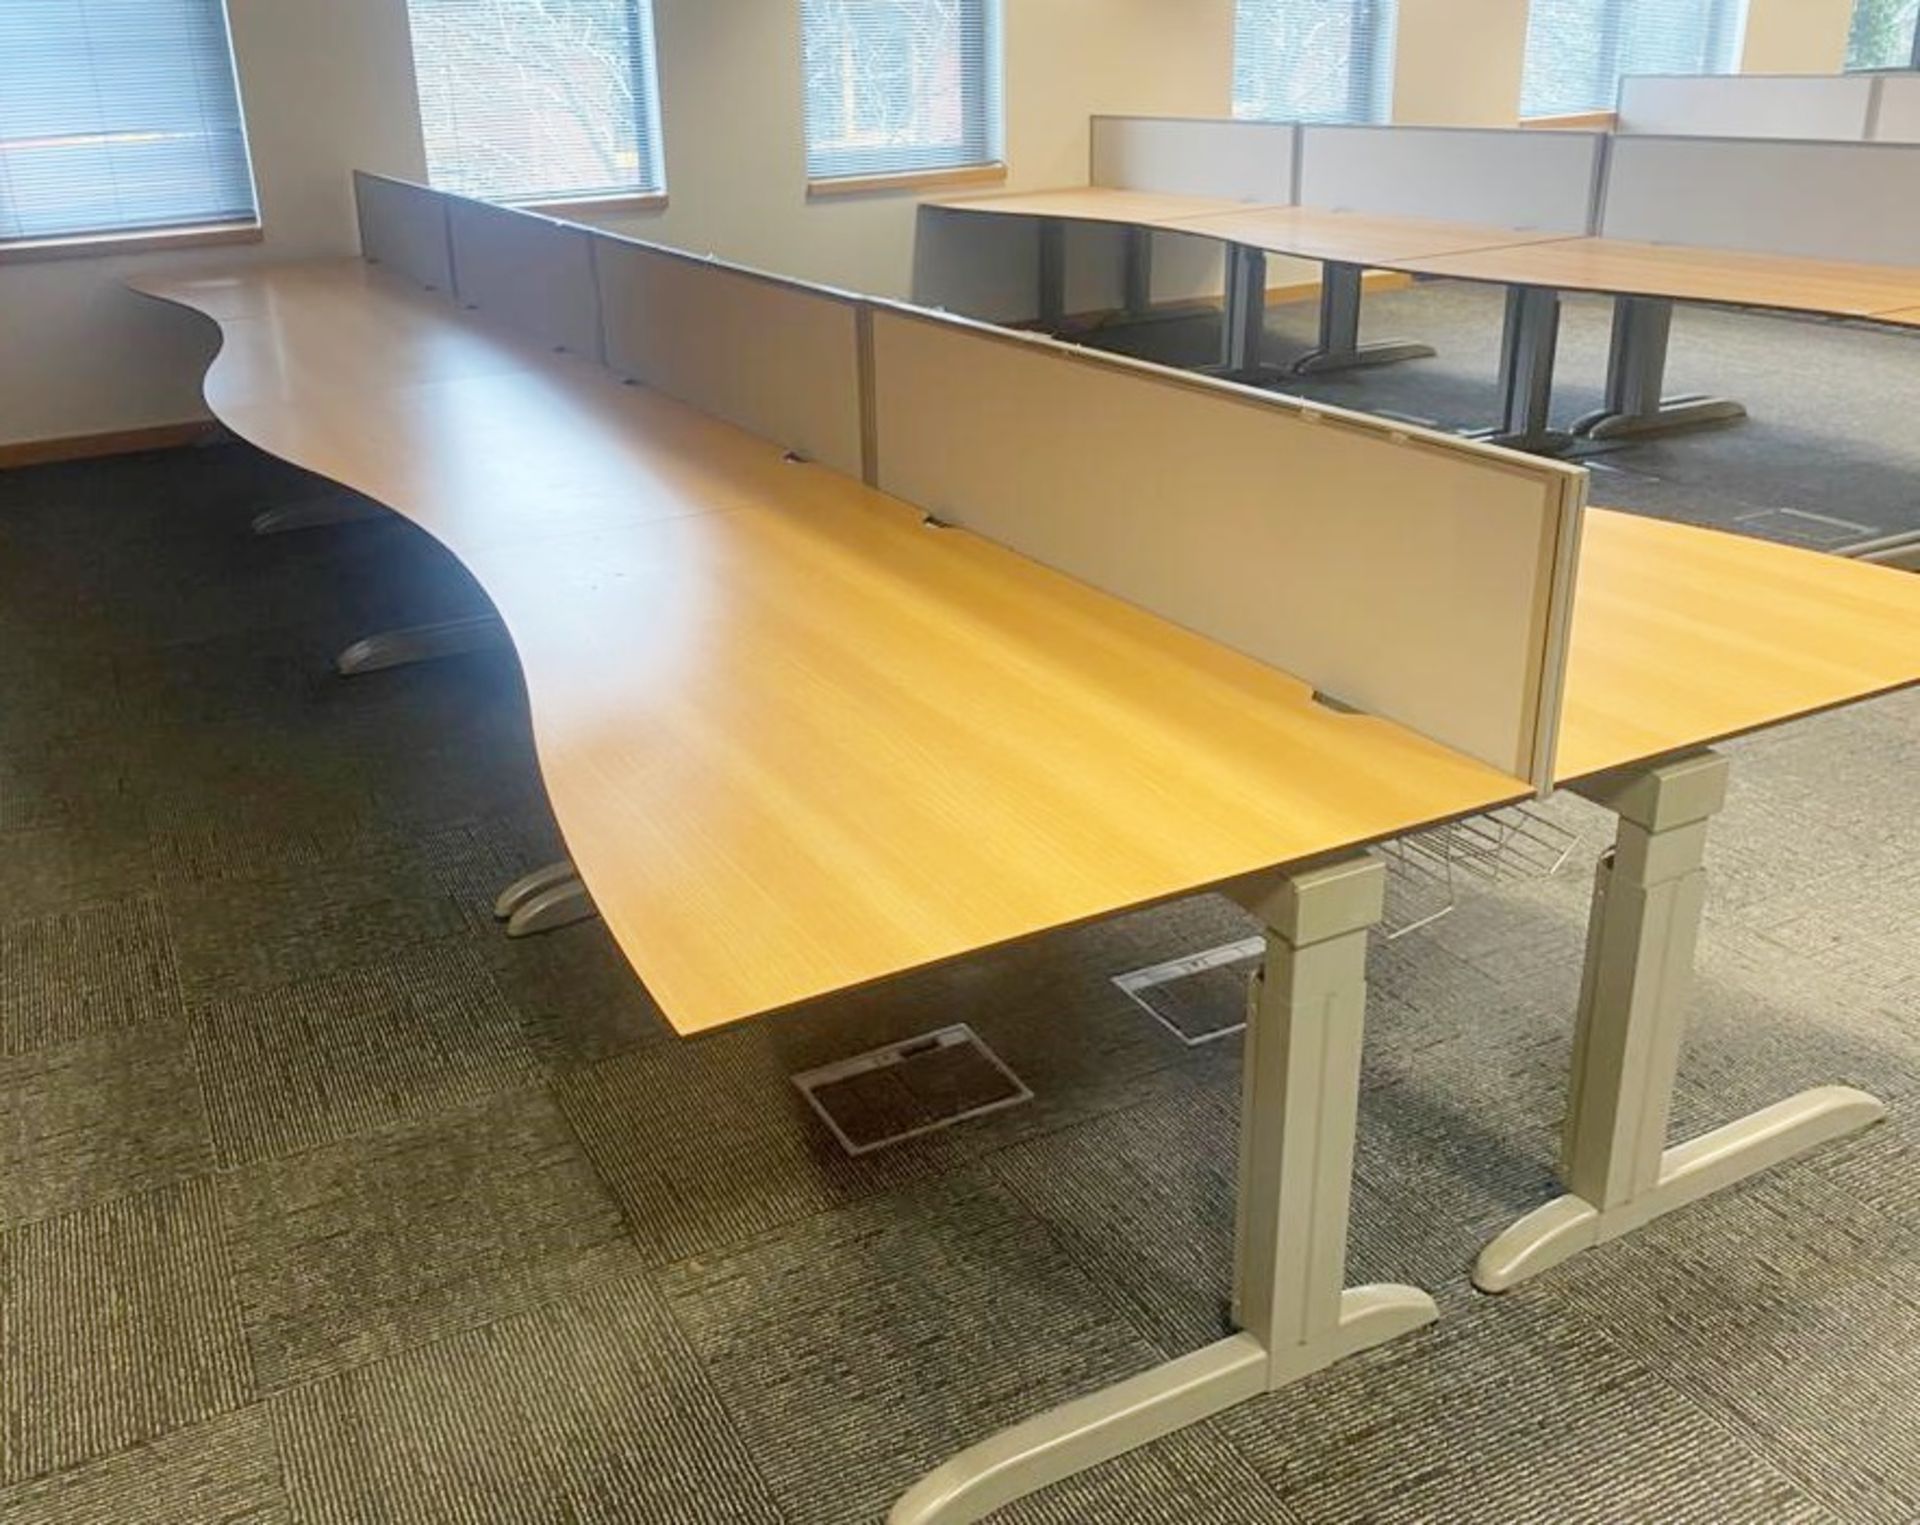 8 x Techo Wave Office Desks With Privacy Panels and Cable Tidy Cages - Beech Wood Finish with Grey - Image 2 of 20